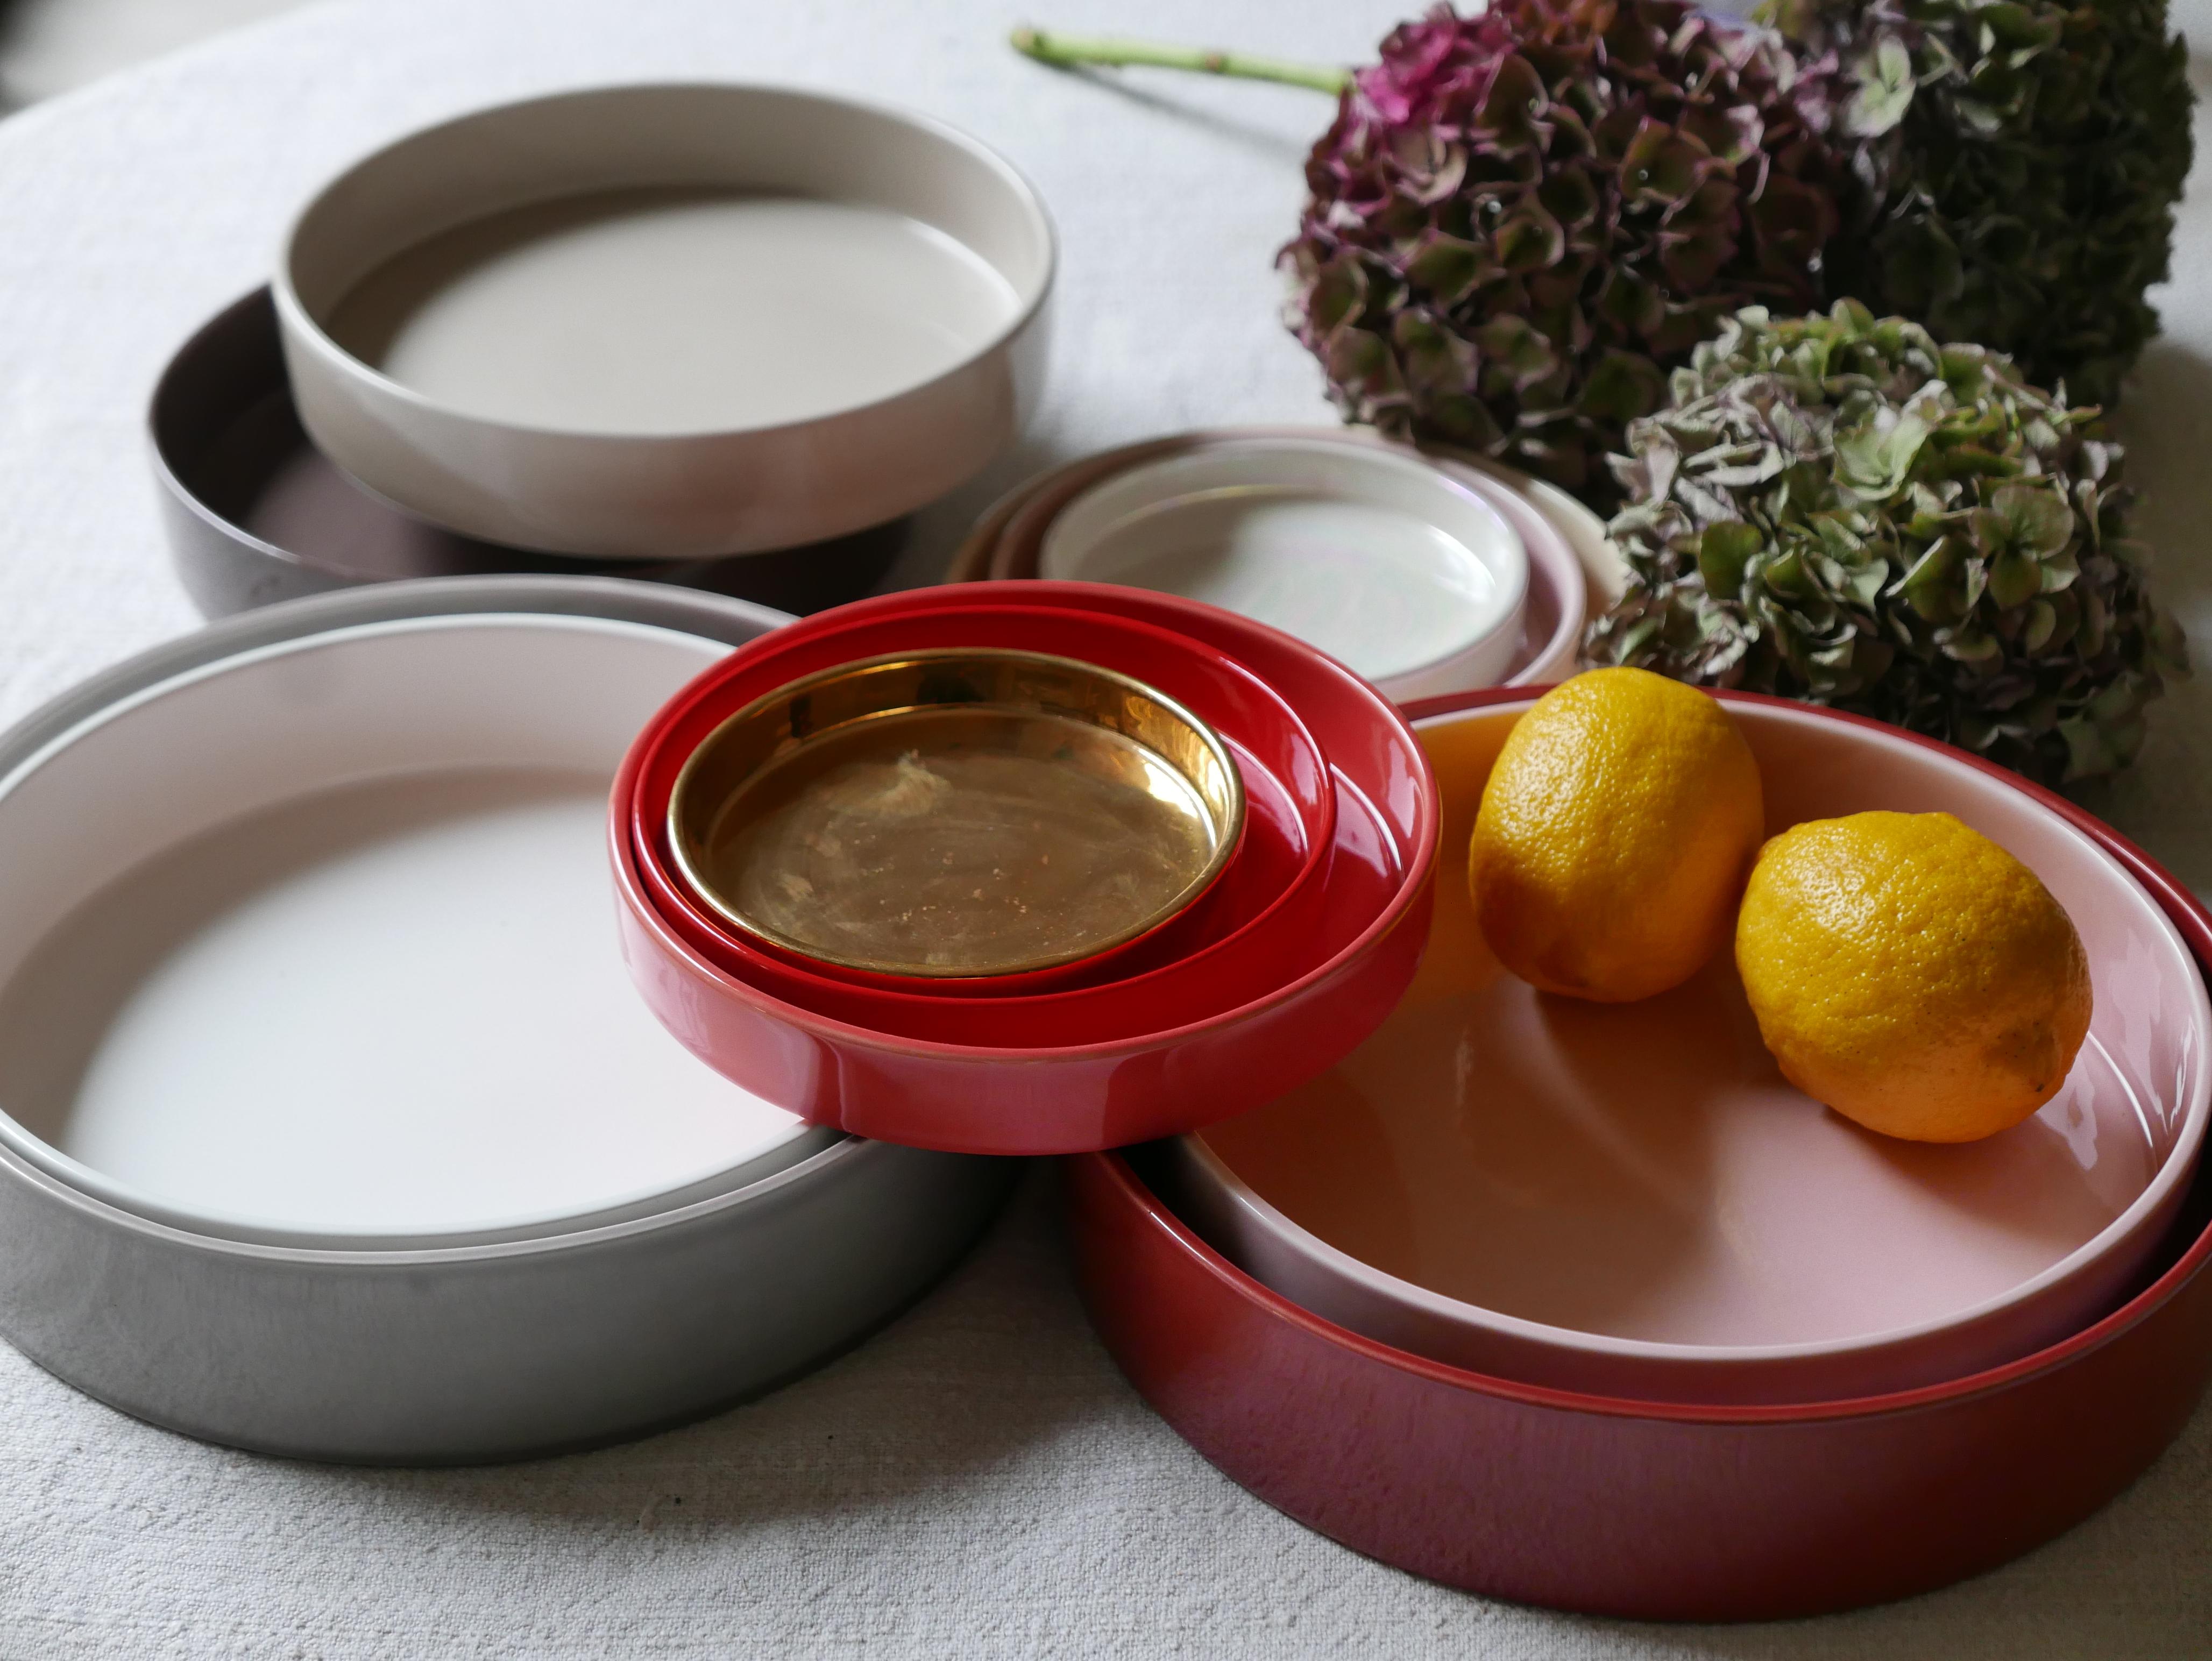 Modern 21st Century Ceramic Set Serving Plates Neutral and Warm Tones Made in Italy For Sale